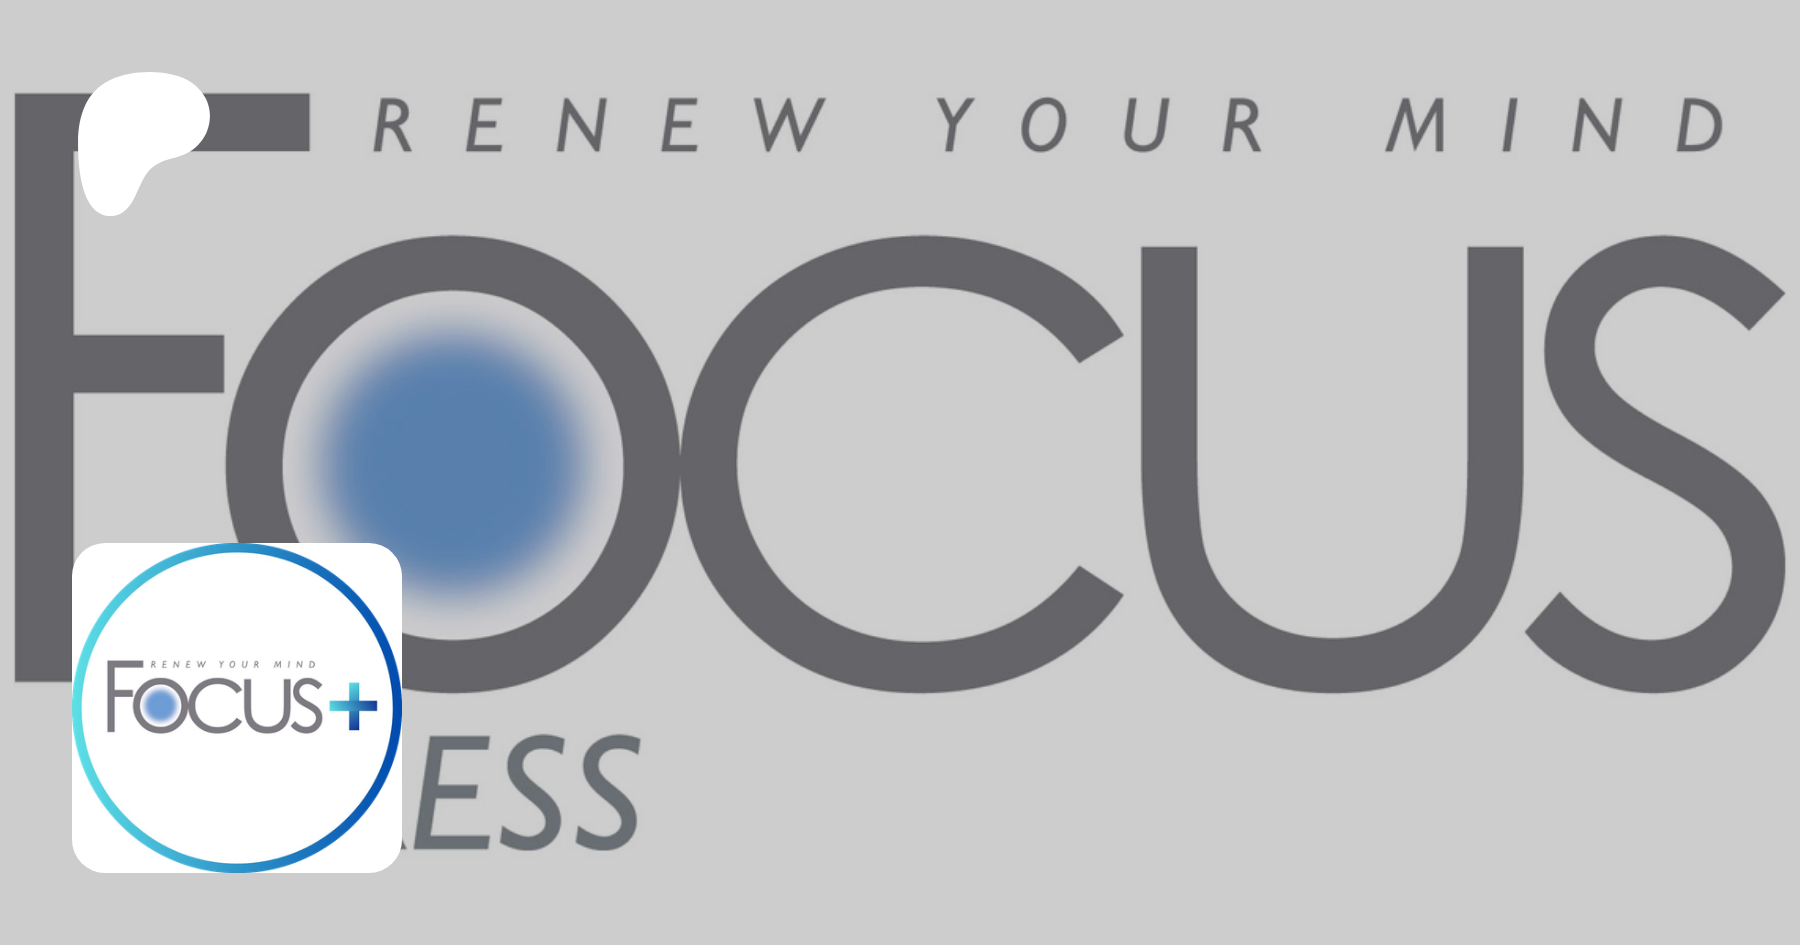 Focus Plus, Christian worldview content via videos, podcasts, and articles